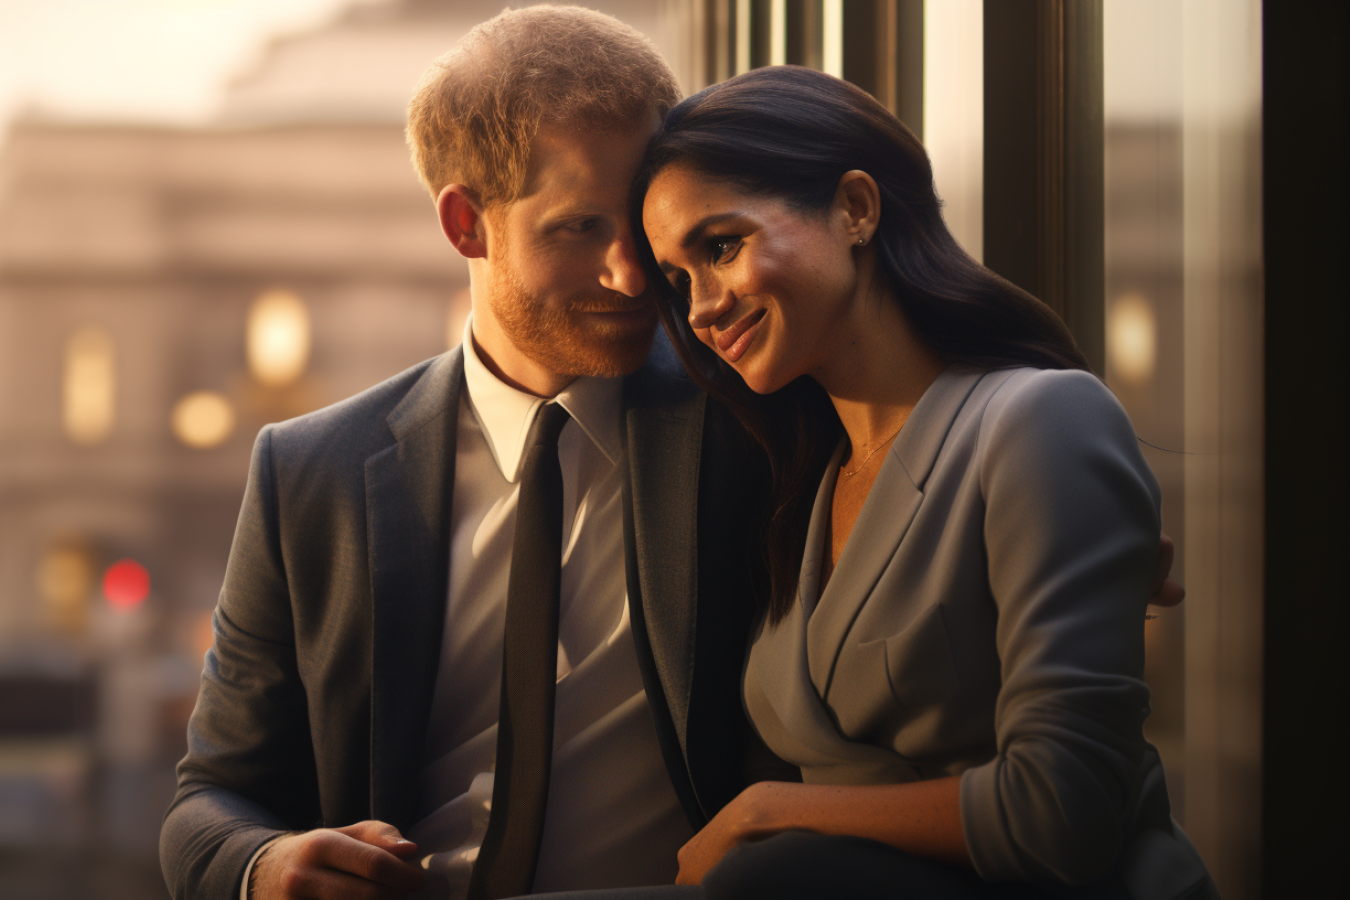 Prince Harry and Meghan Markle AI Generated